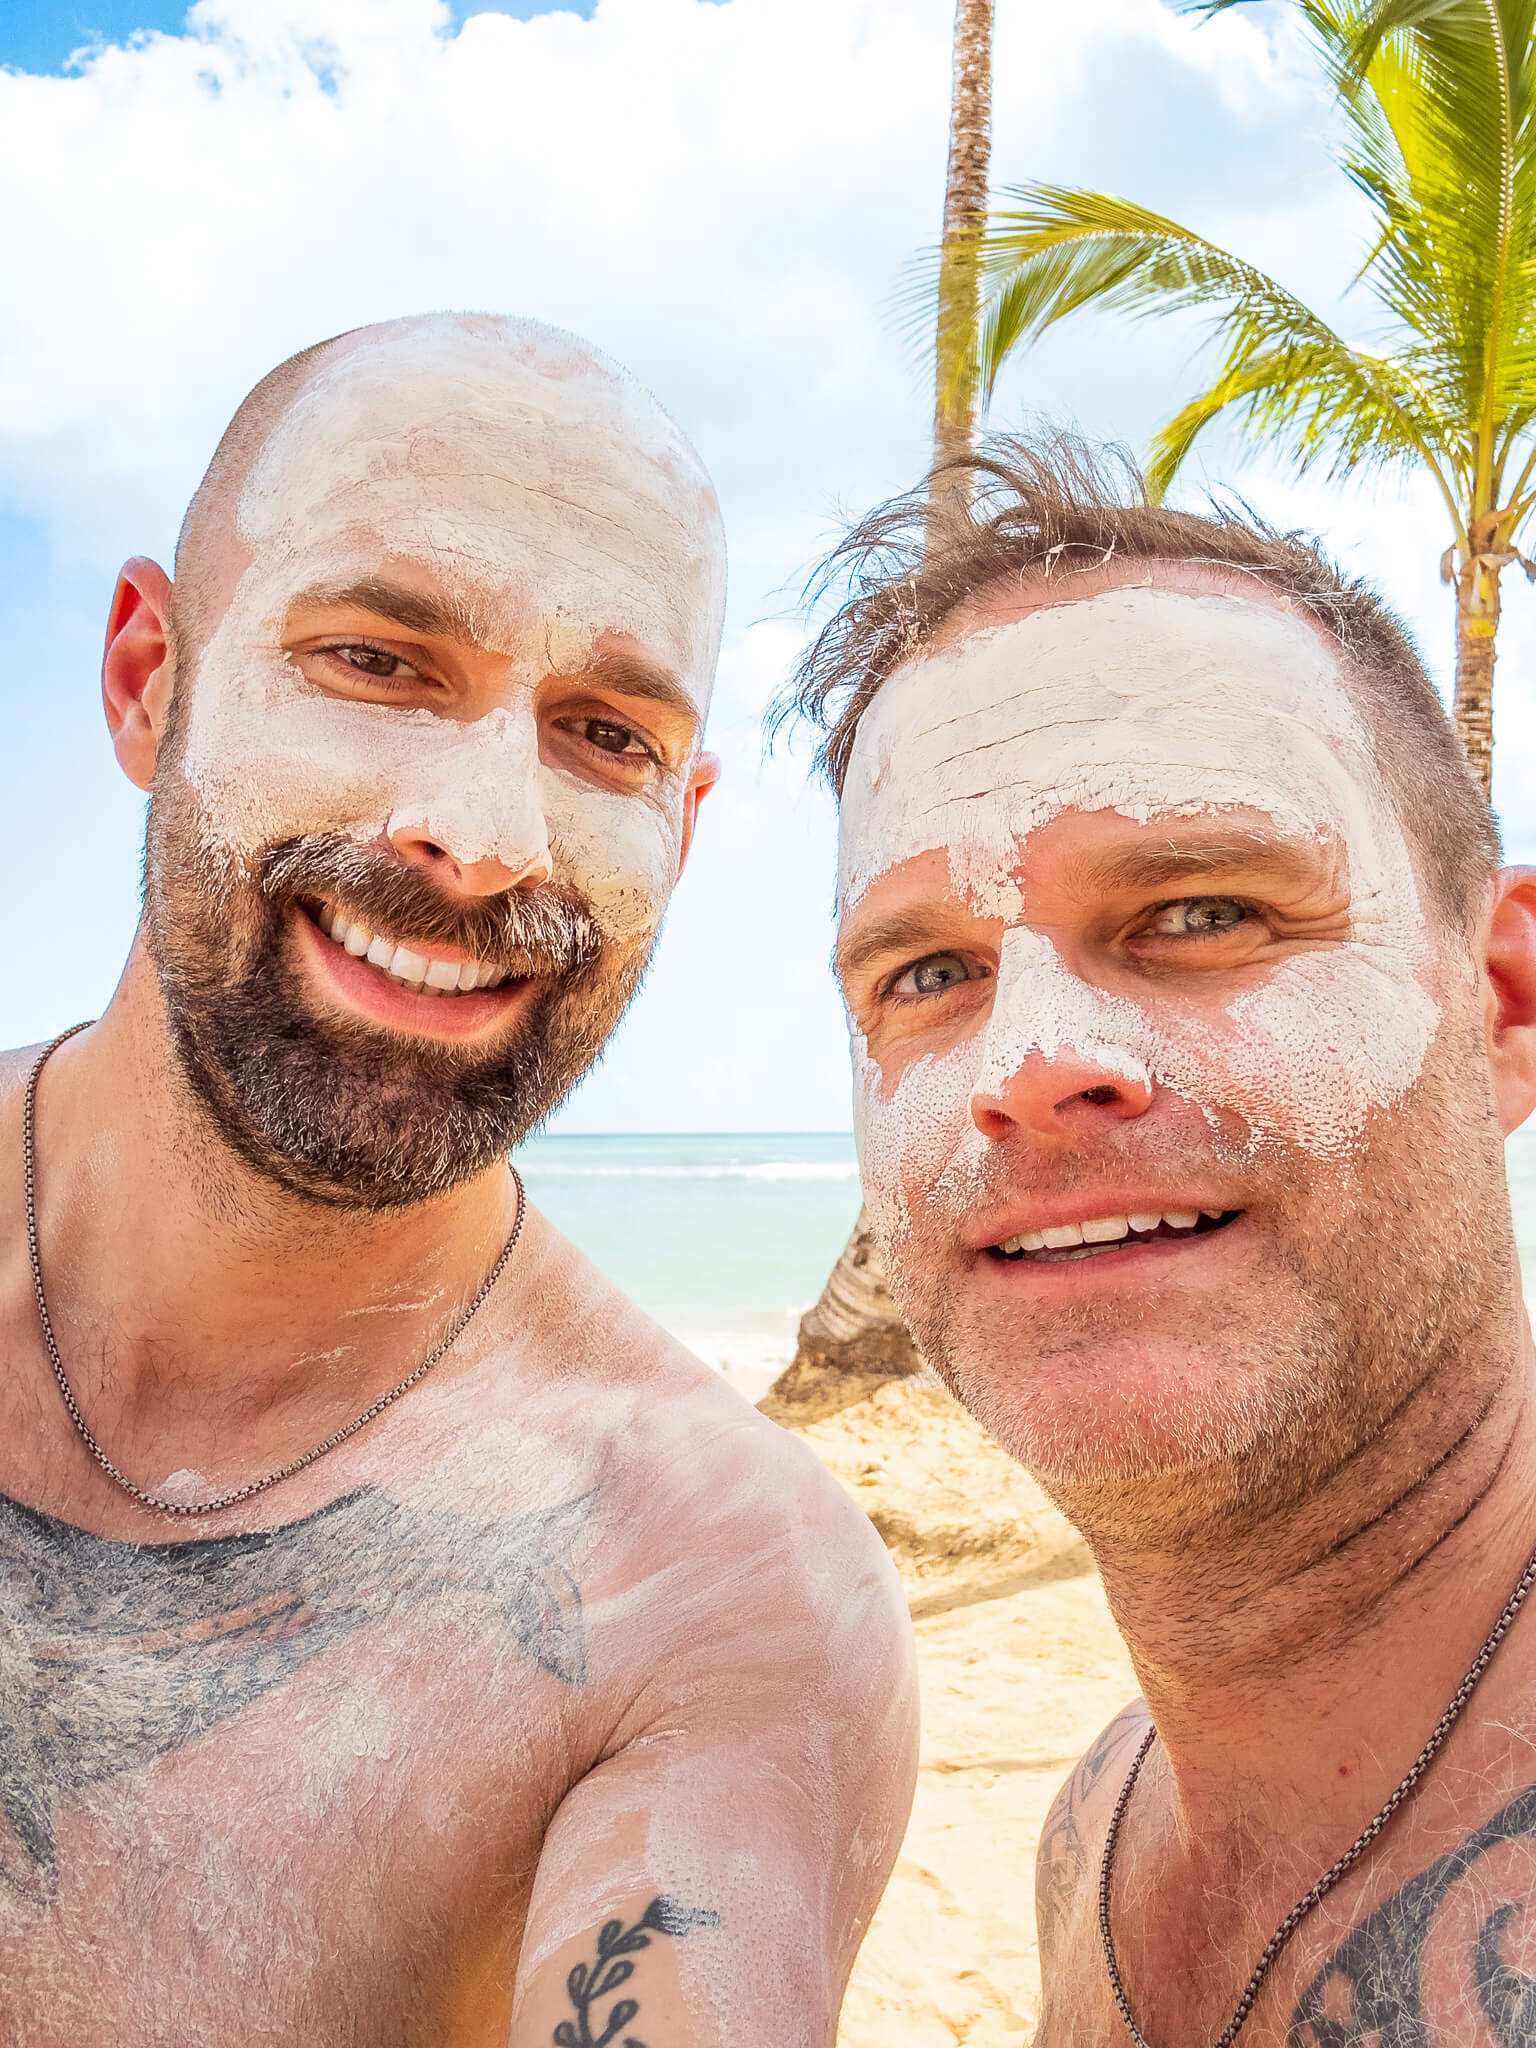 Enjoying some mud therapy on the beach at Excellence El Carmen